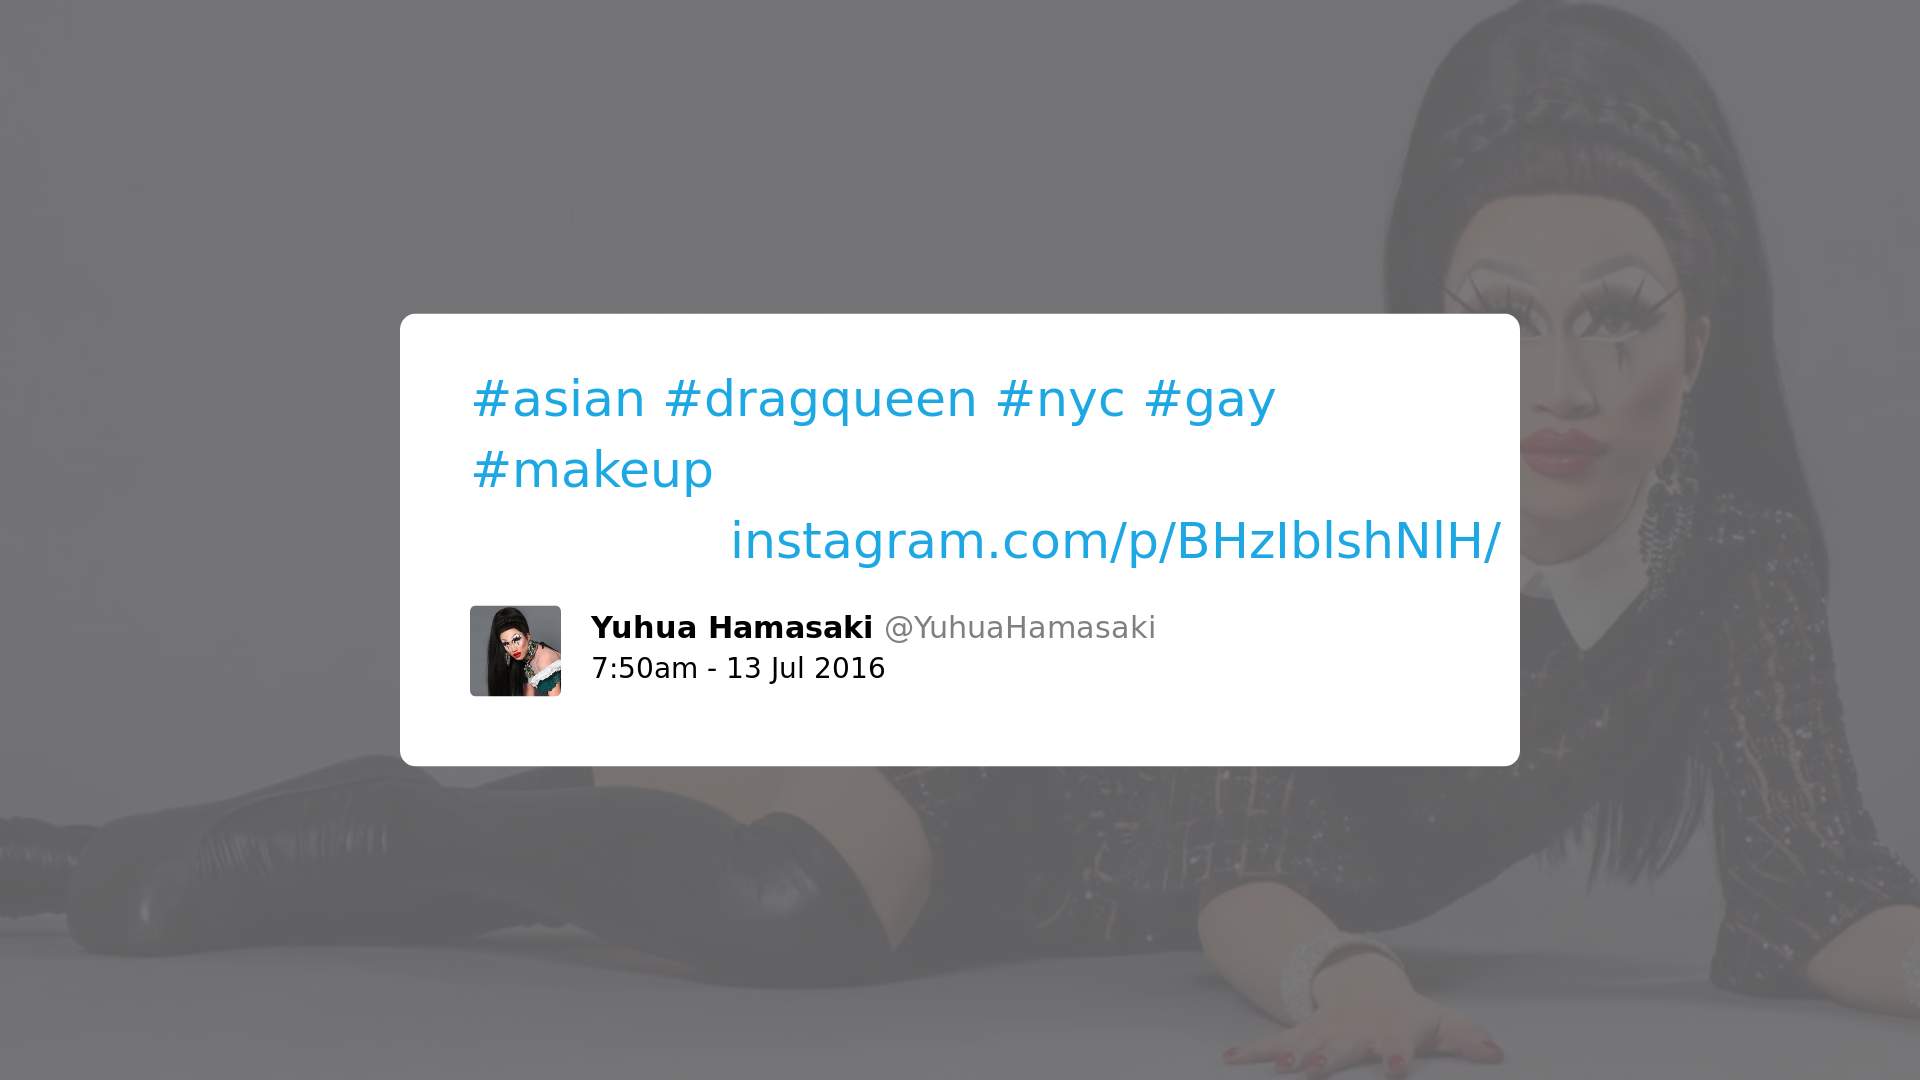 Print screen of a post by Yuhua Hamasaki with the text: #asian #dragqueen #nyc #gay #makeup instagram.com/p/BHzIblshNIH/